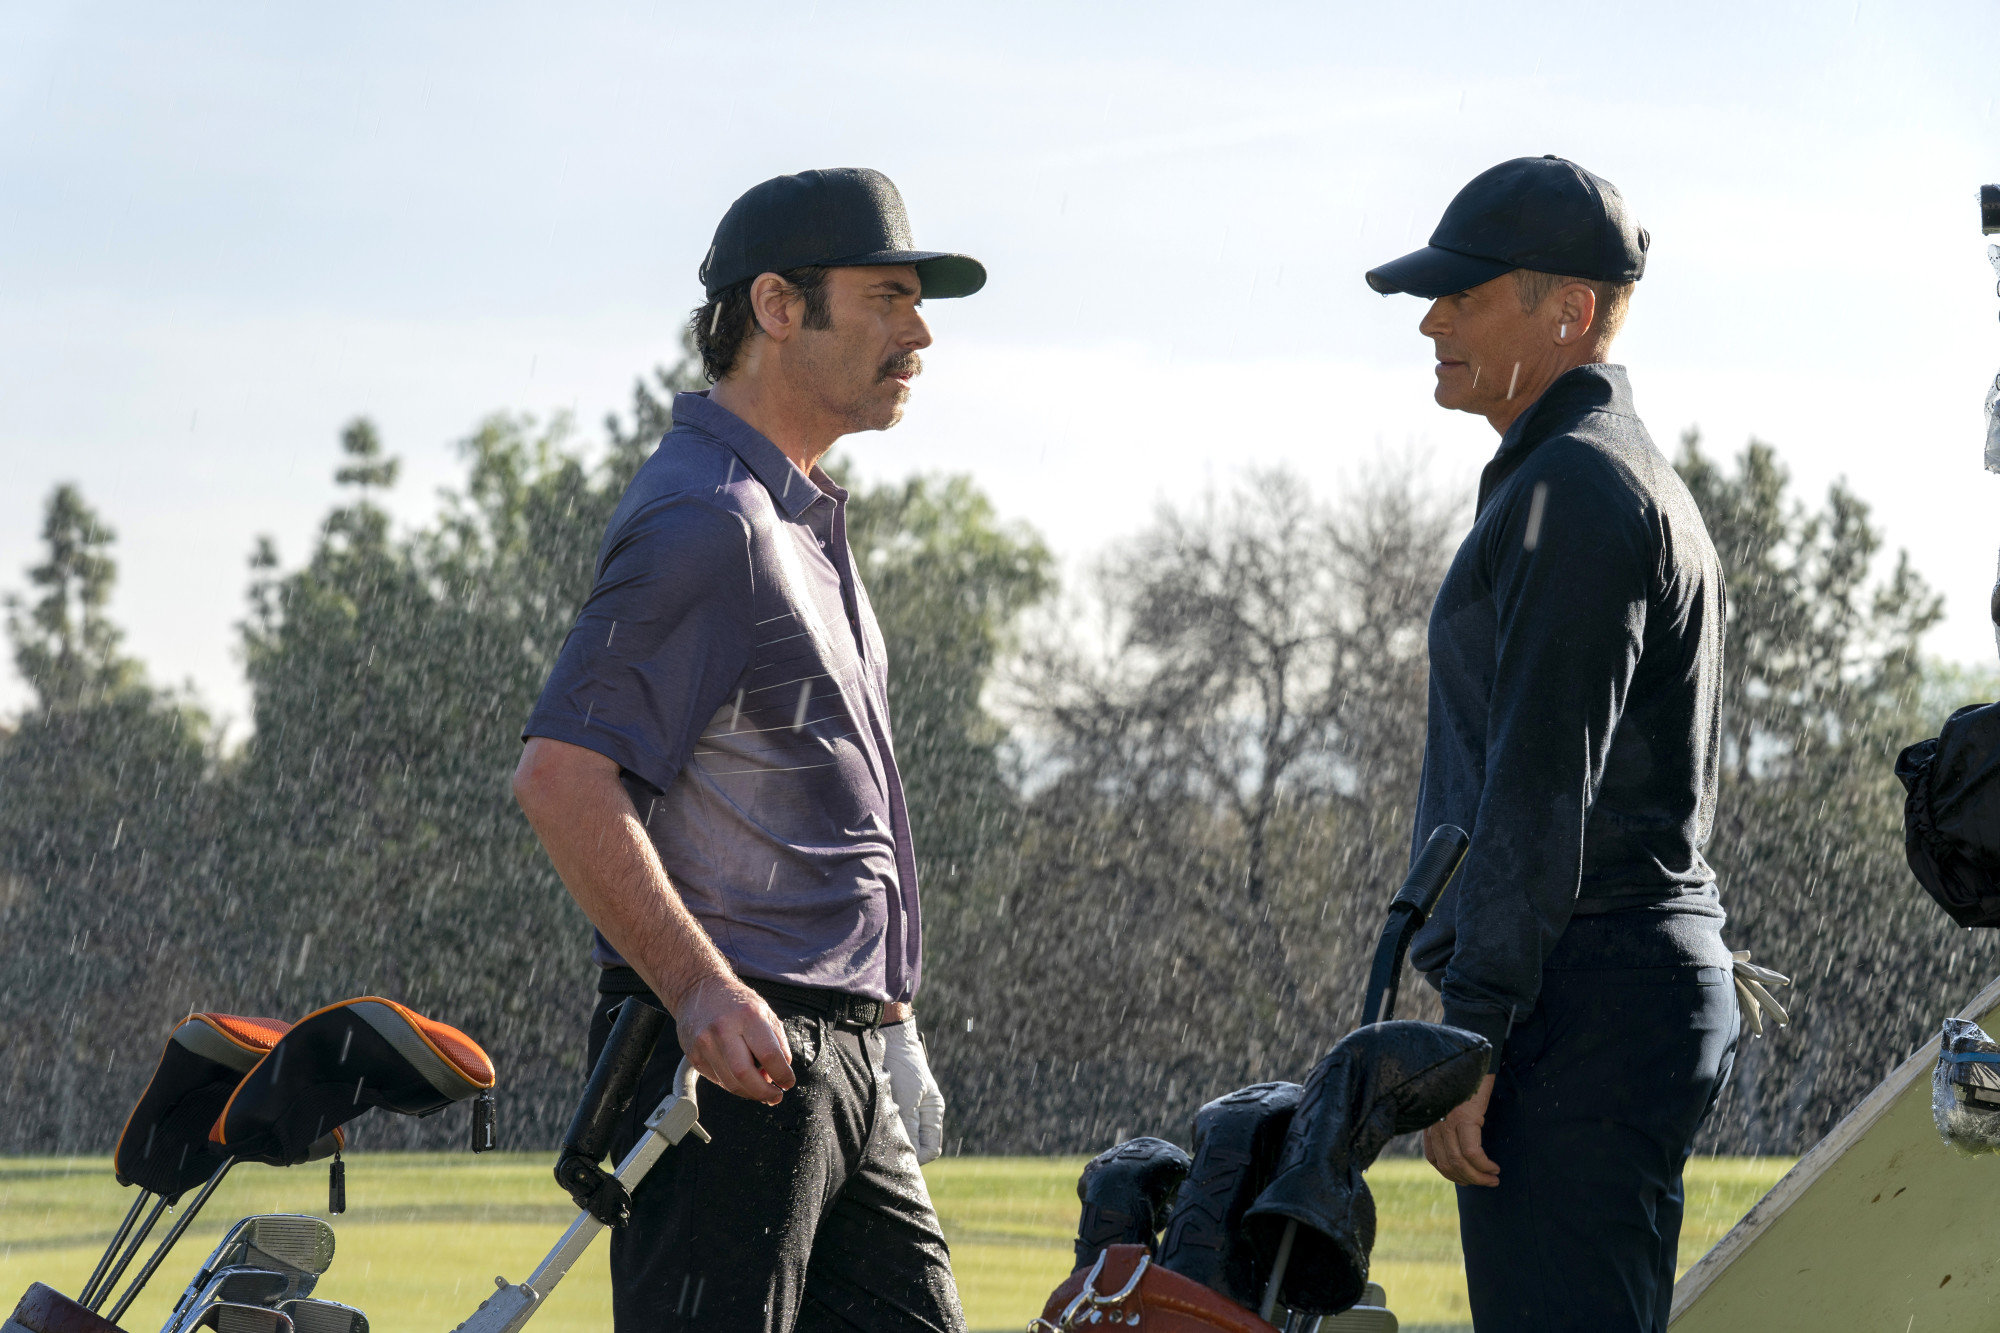 9-1-1: LONE STAR: L-R: Guest star Billy Burke and Rob Lowe in the “Bum Steer” episode of 9-1-1: LONE STAR airing Monday, Feb. 24 (8:00-9:01 PM ET/PT) on FOX. ©2020 Fox Media LLC. CR: Jack Zeman/FOX.